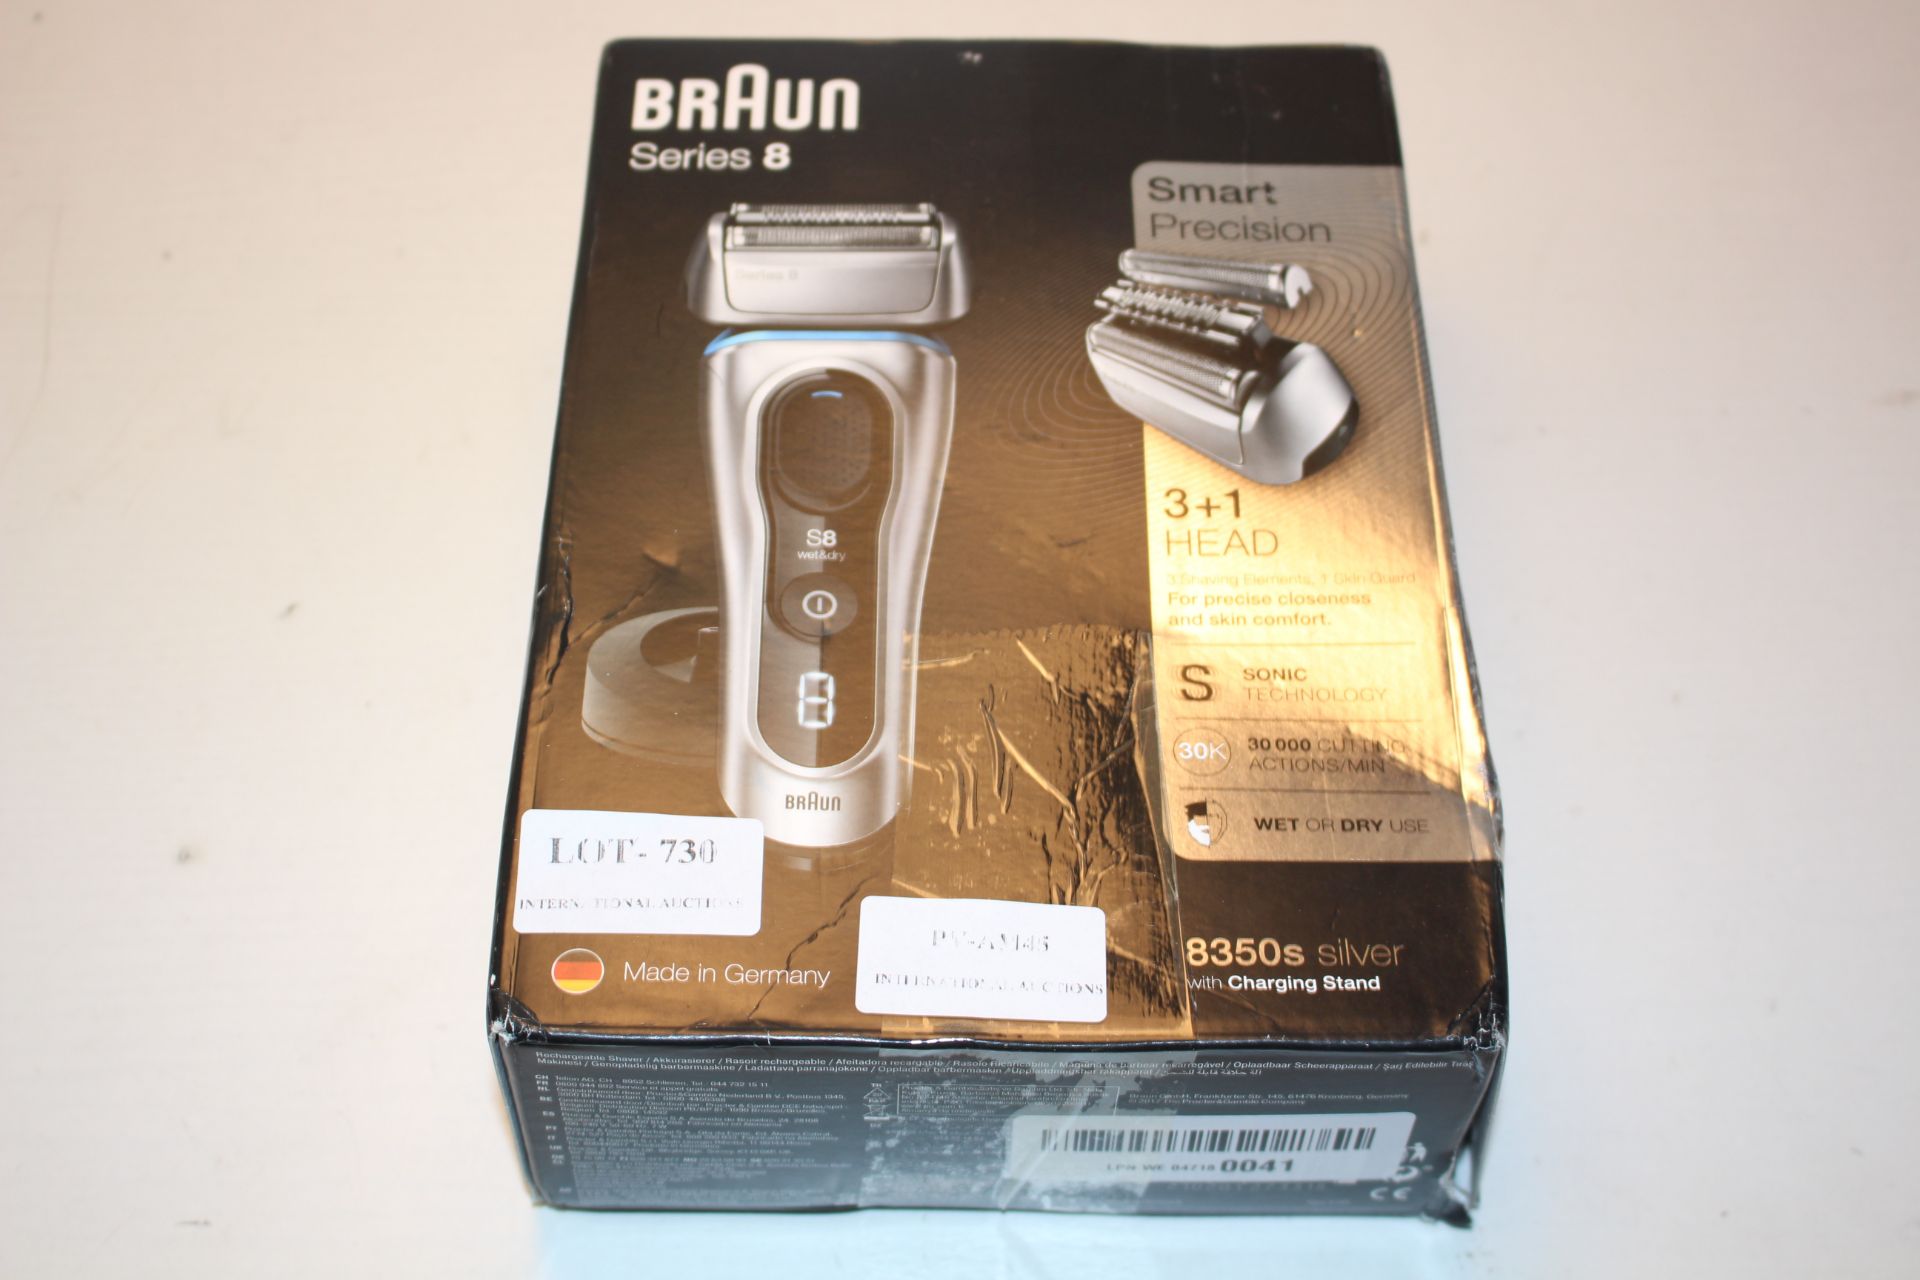 BOXED BRAUN SERIES 8 WET & DRY SHAVER MODEL: 8350S SILVER WITH CHARGING STAND RRP £185.00Condition